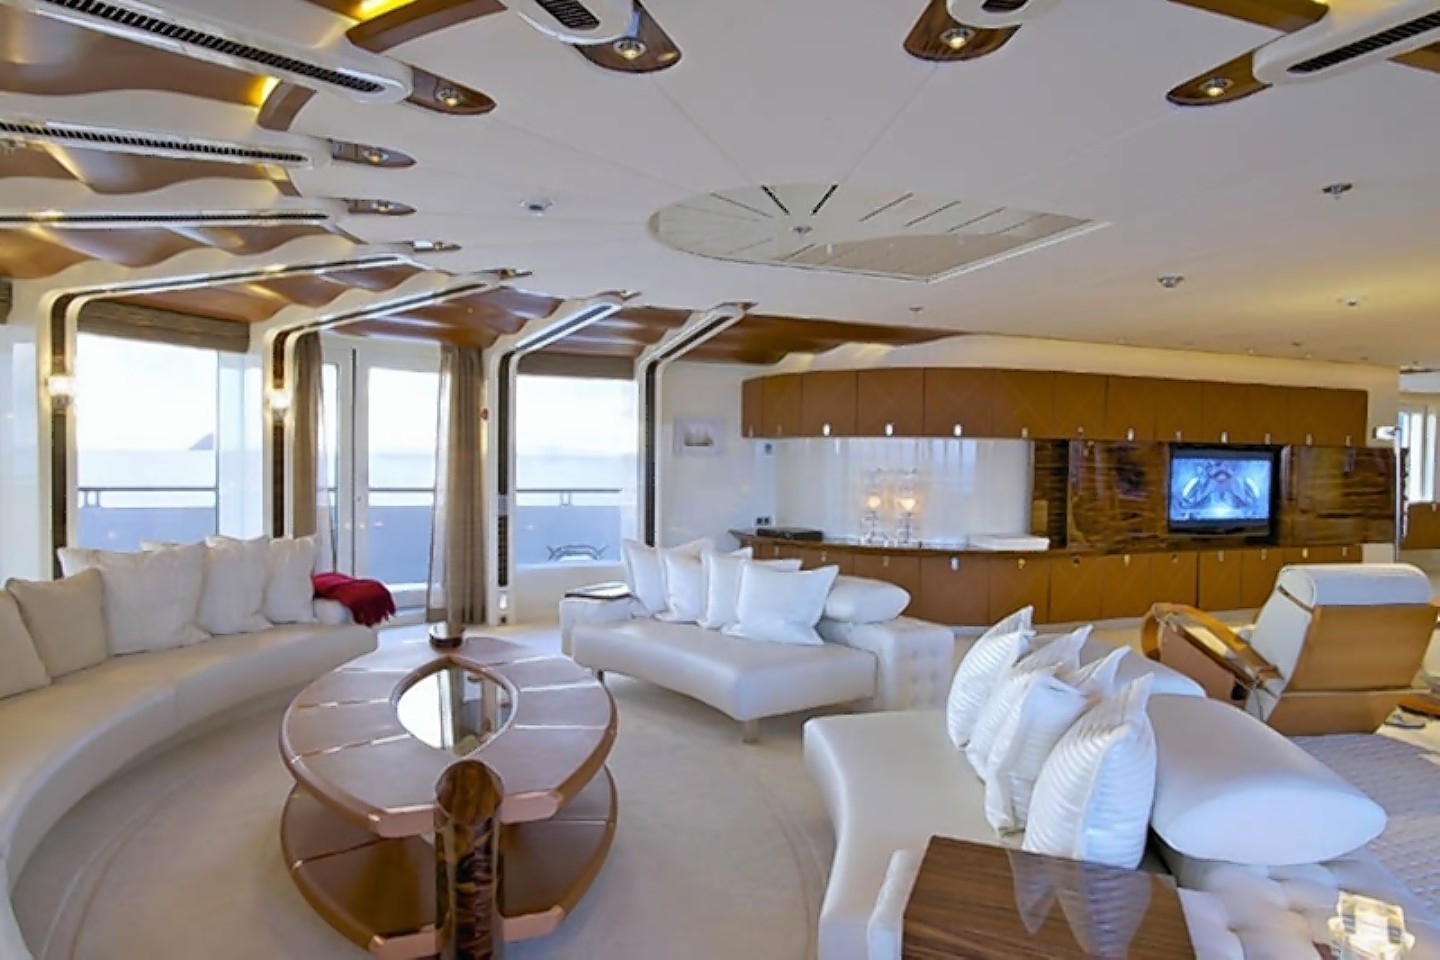 Inside Willy Michel's super yacht